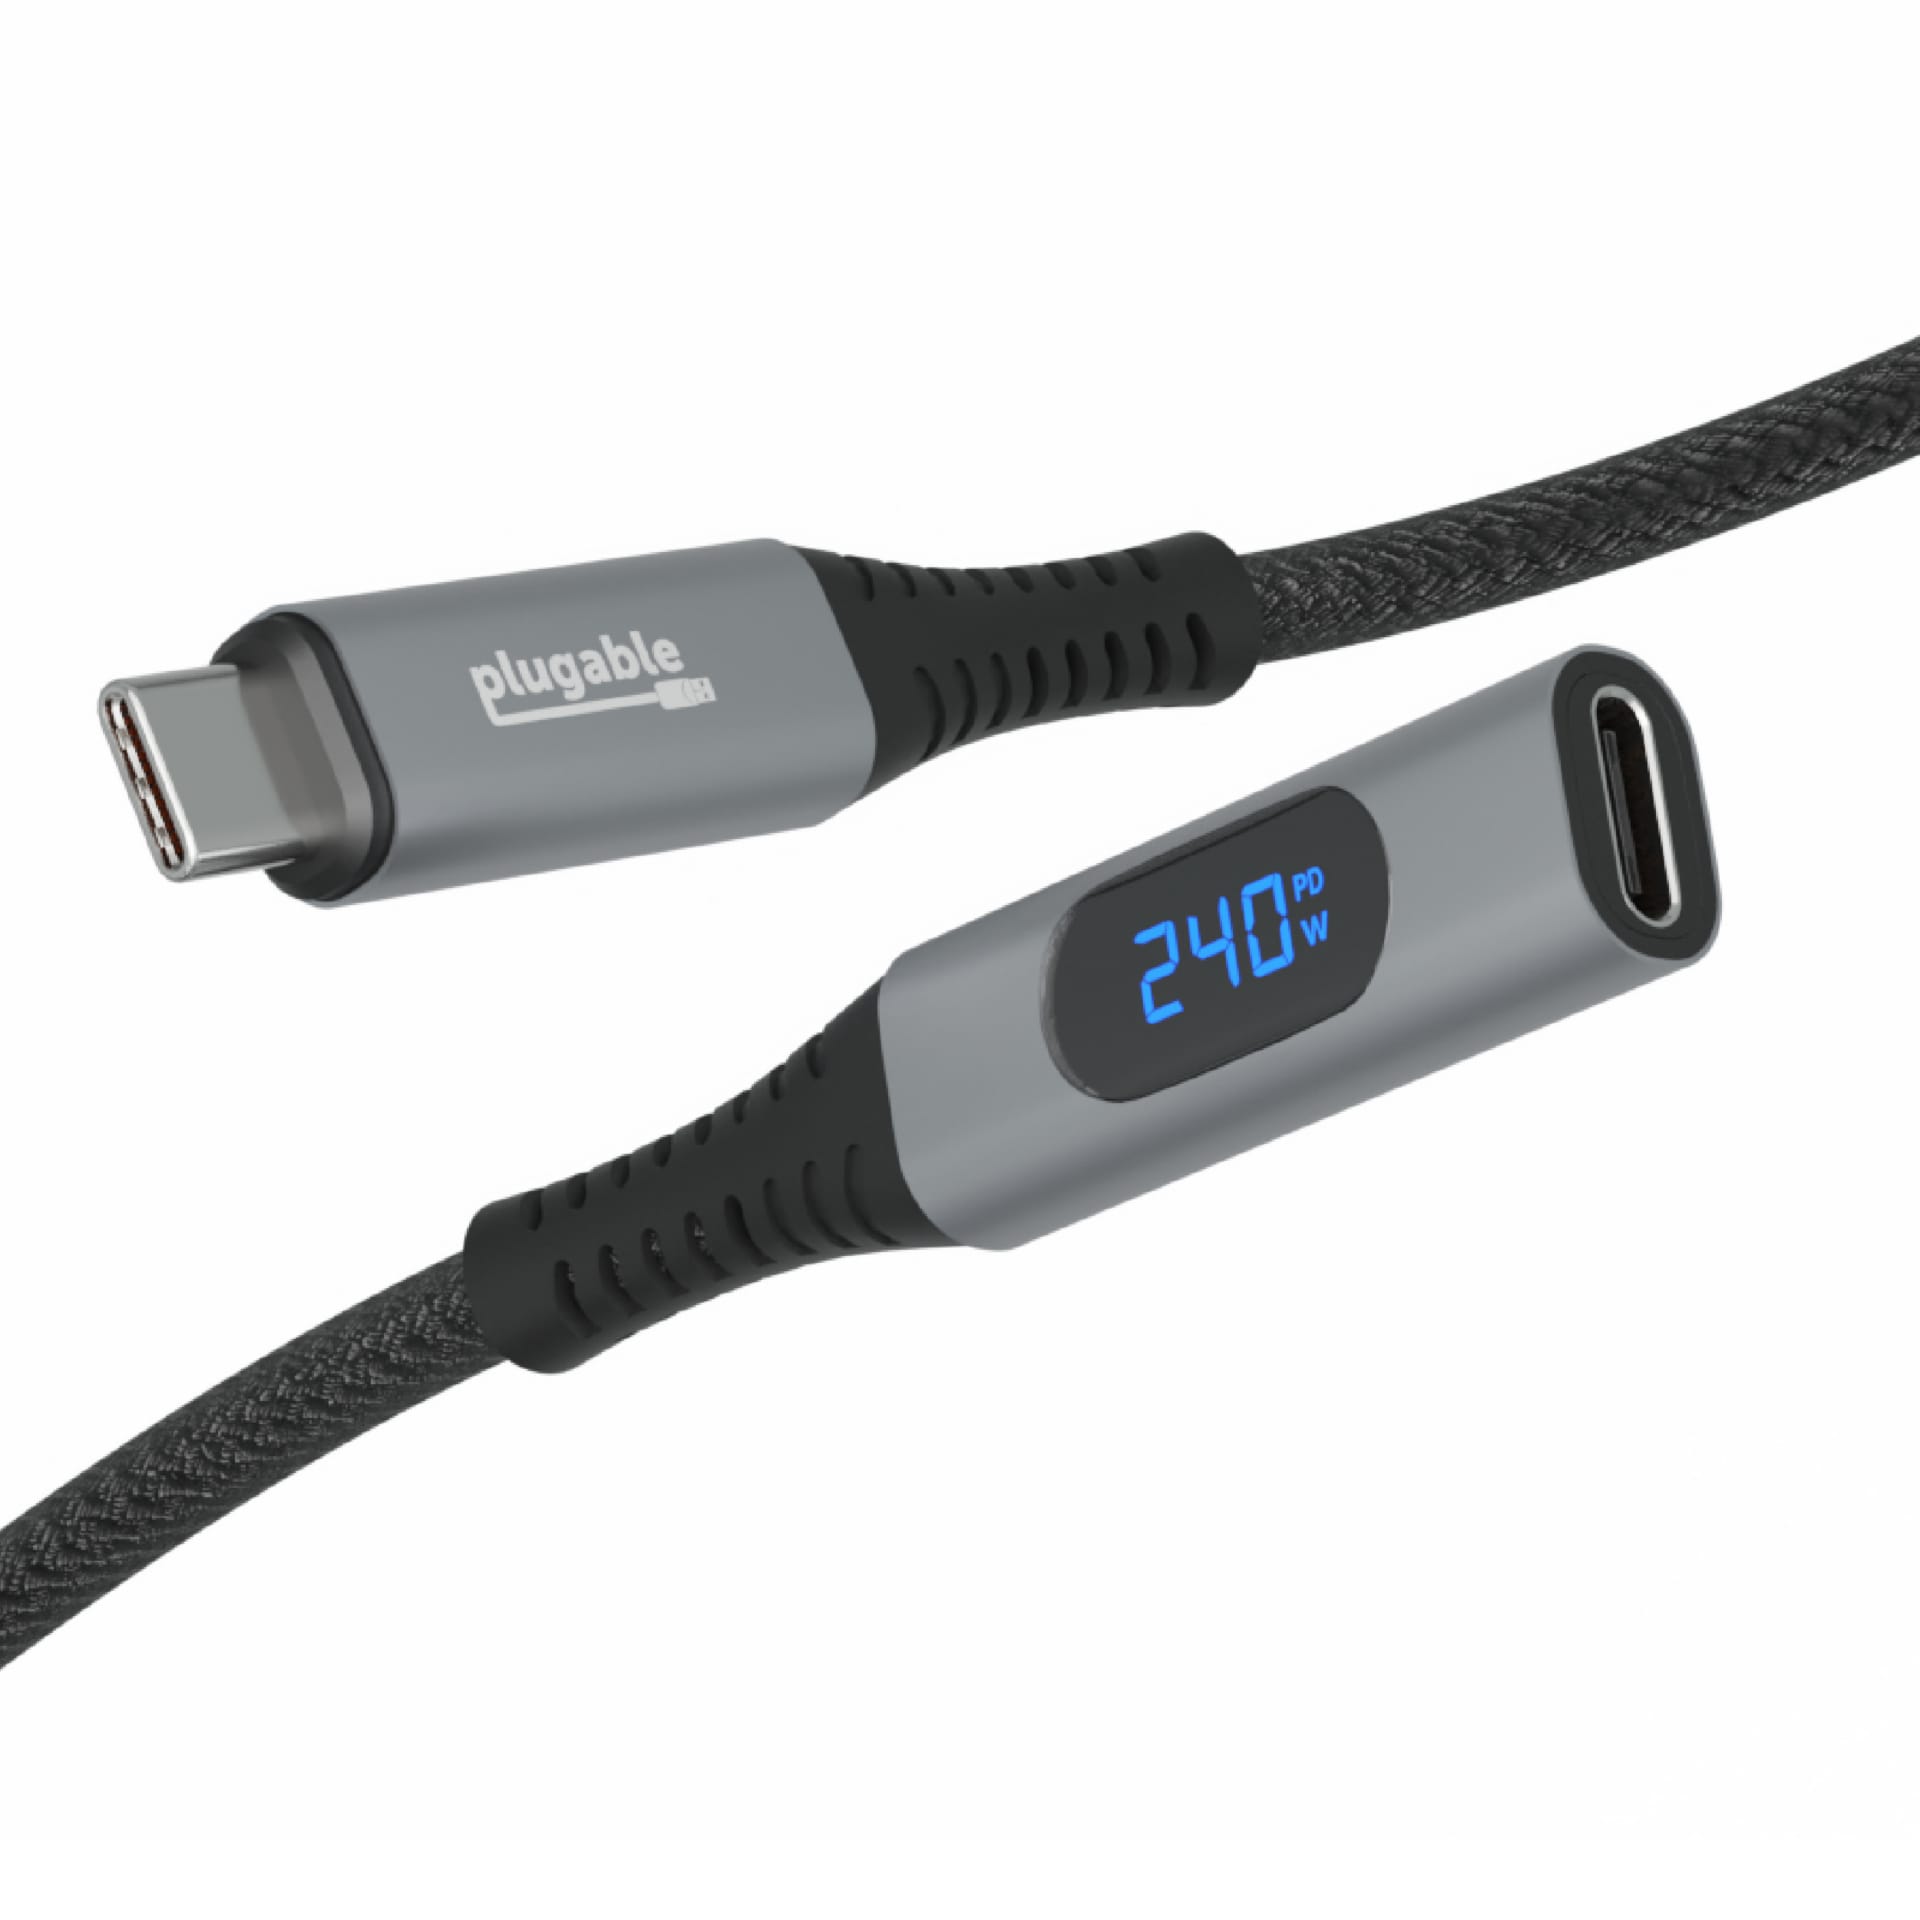 Plugable 3.3' USB C Extension Cable